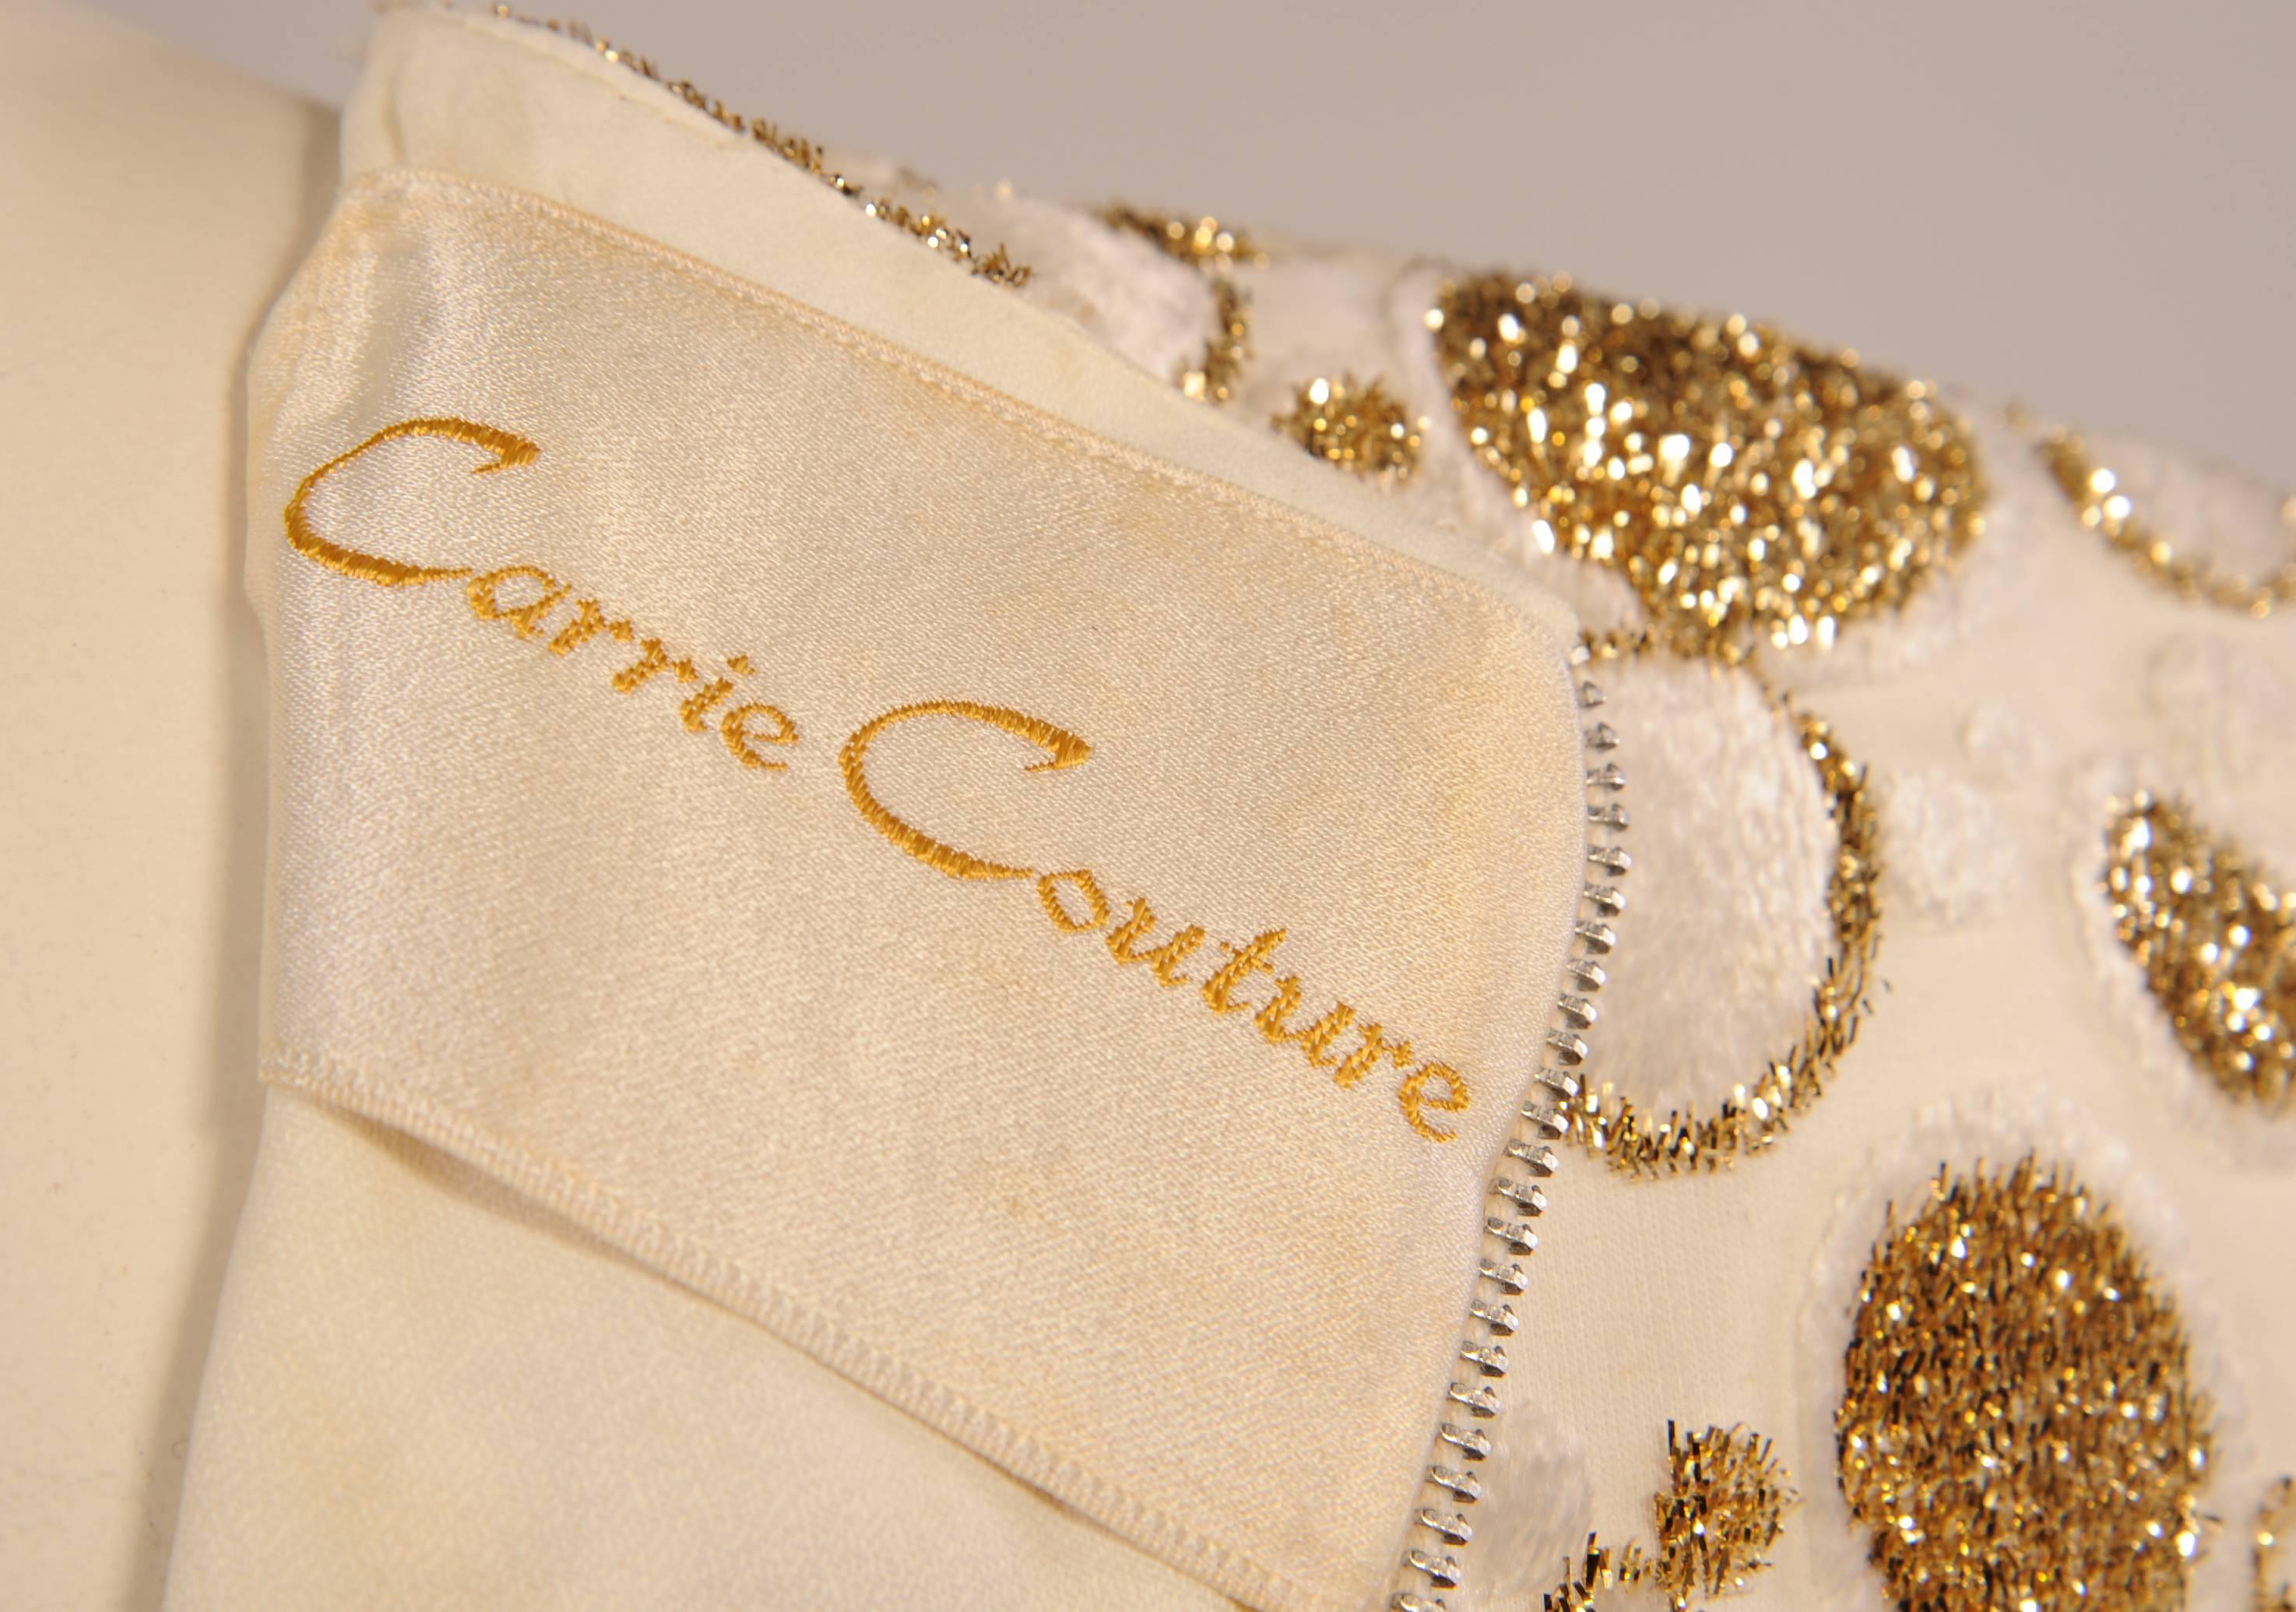 Carrie Couture 1960's Gold and White Velvet and Lurex Chiffon Dress with Jewel  In Excellent Condition For Sale In New Hope, PA